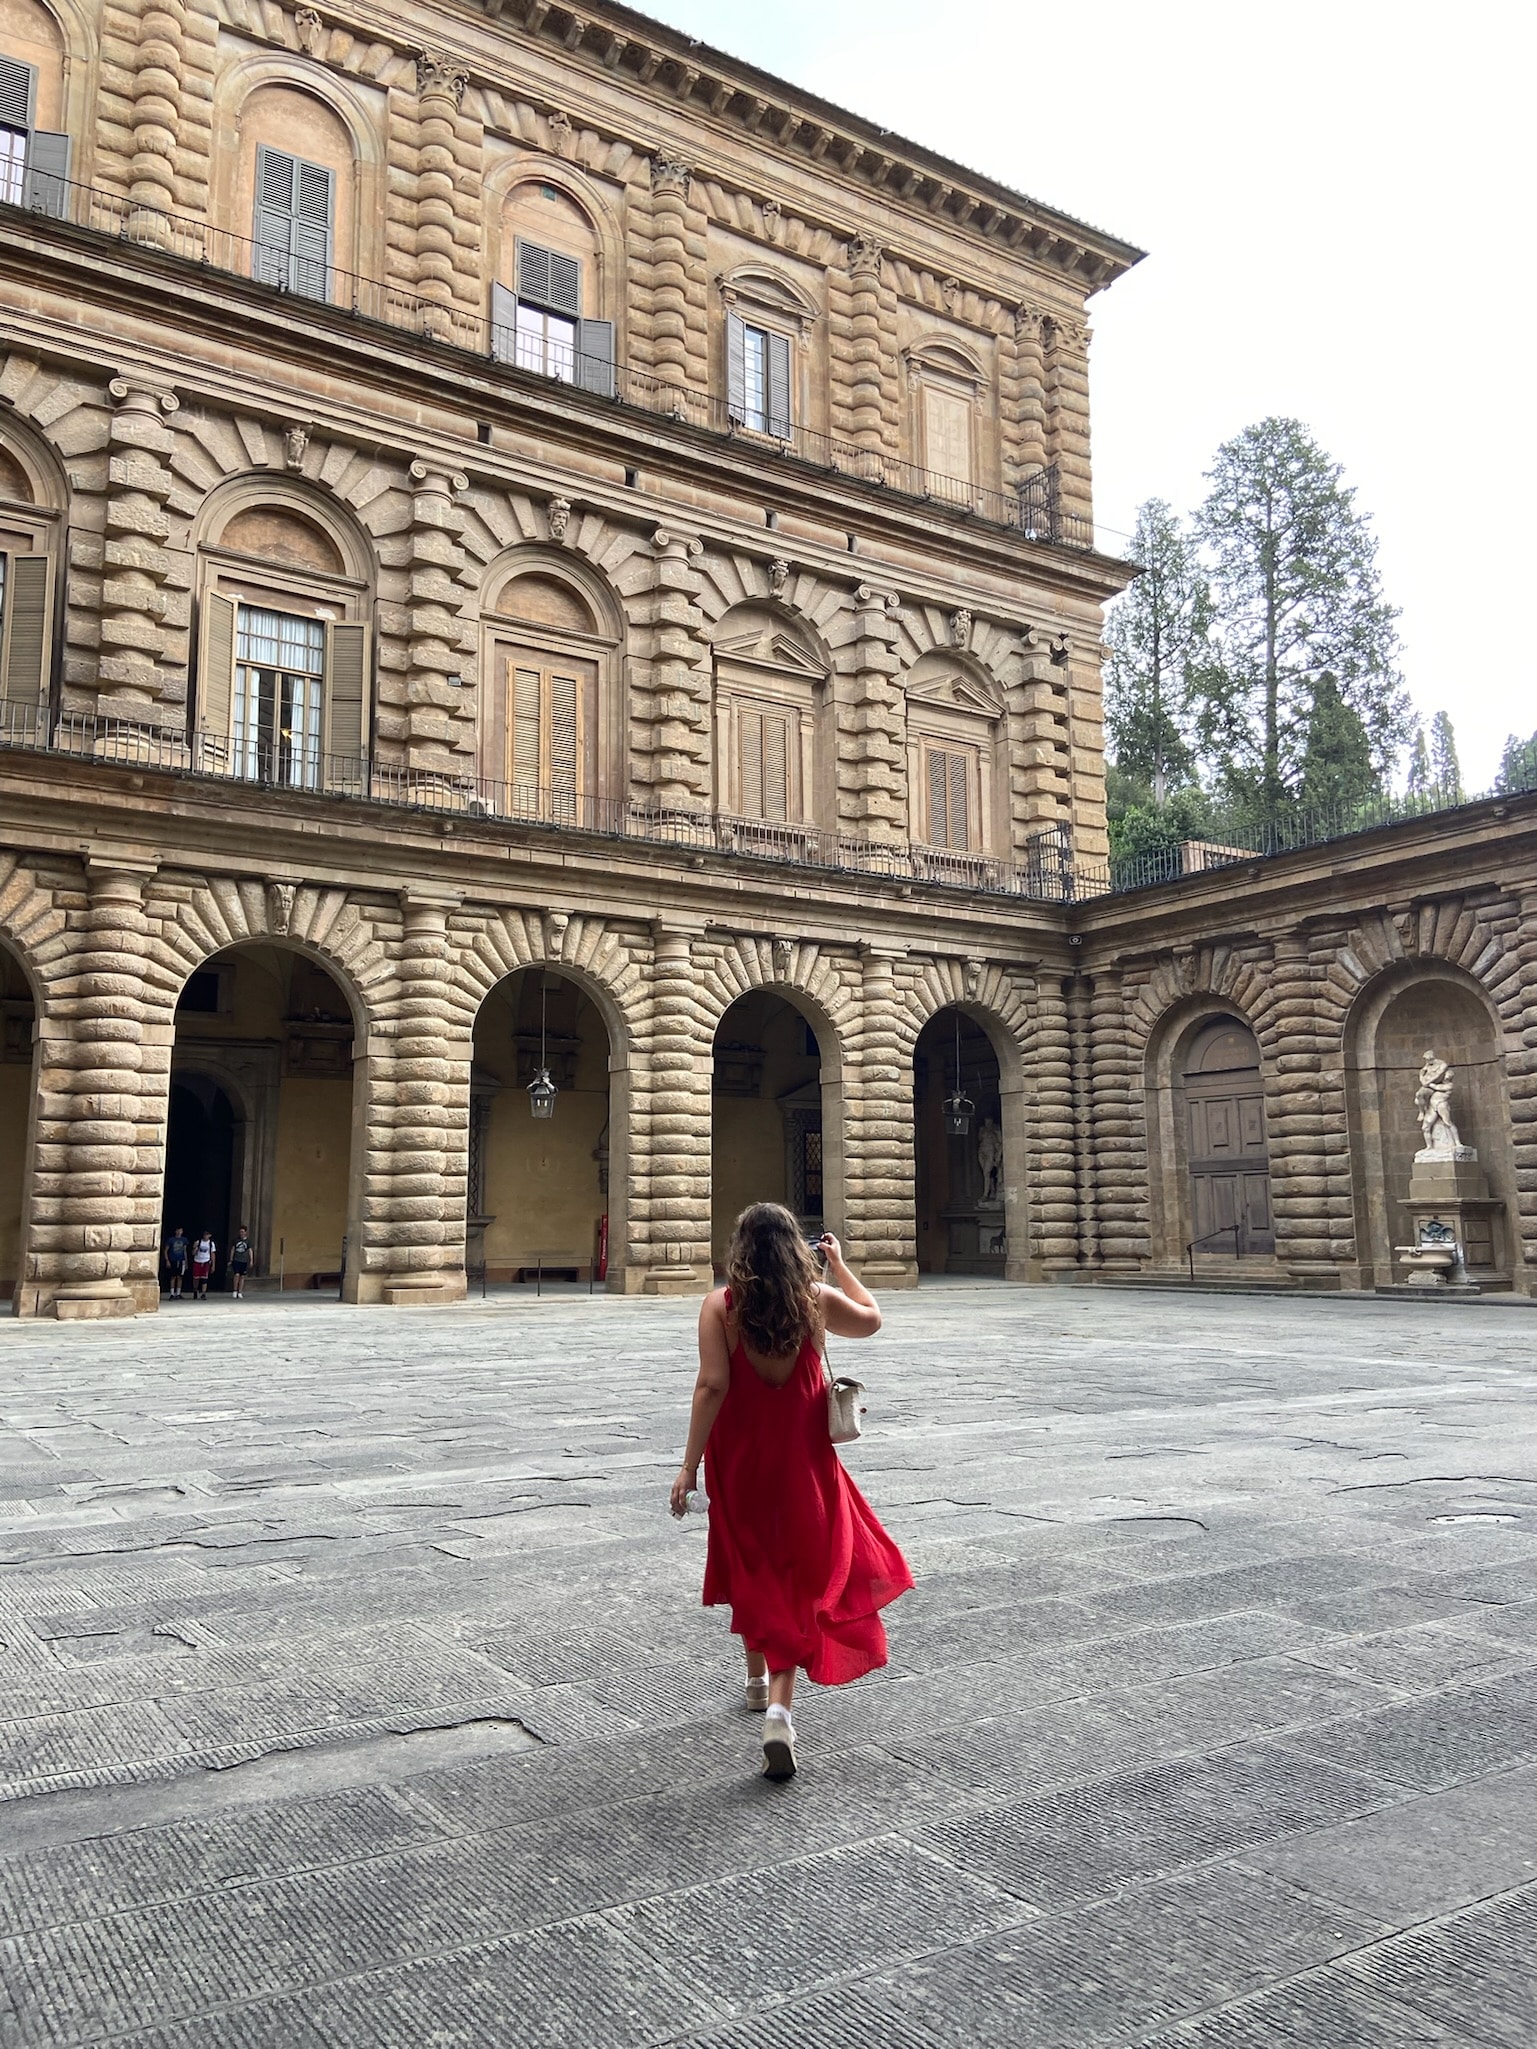 Picture of a woman in a flowy red dress walking through a medieval palace in Florence